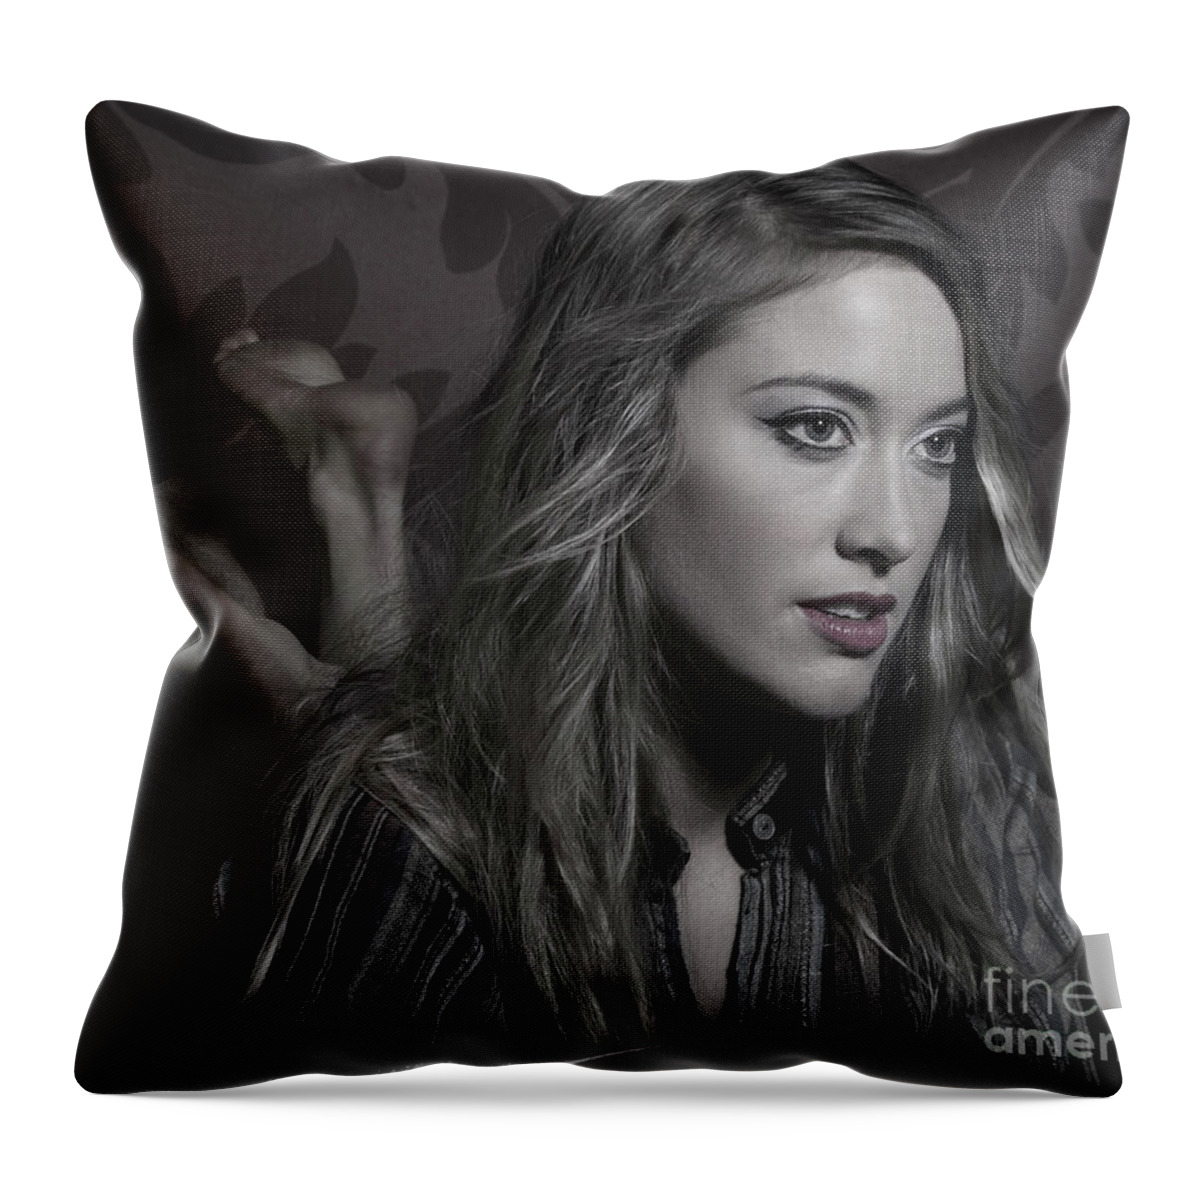 Festblues Throw Pillow featuring the photograph Woman... by Nina Stavlund